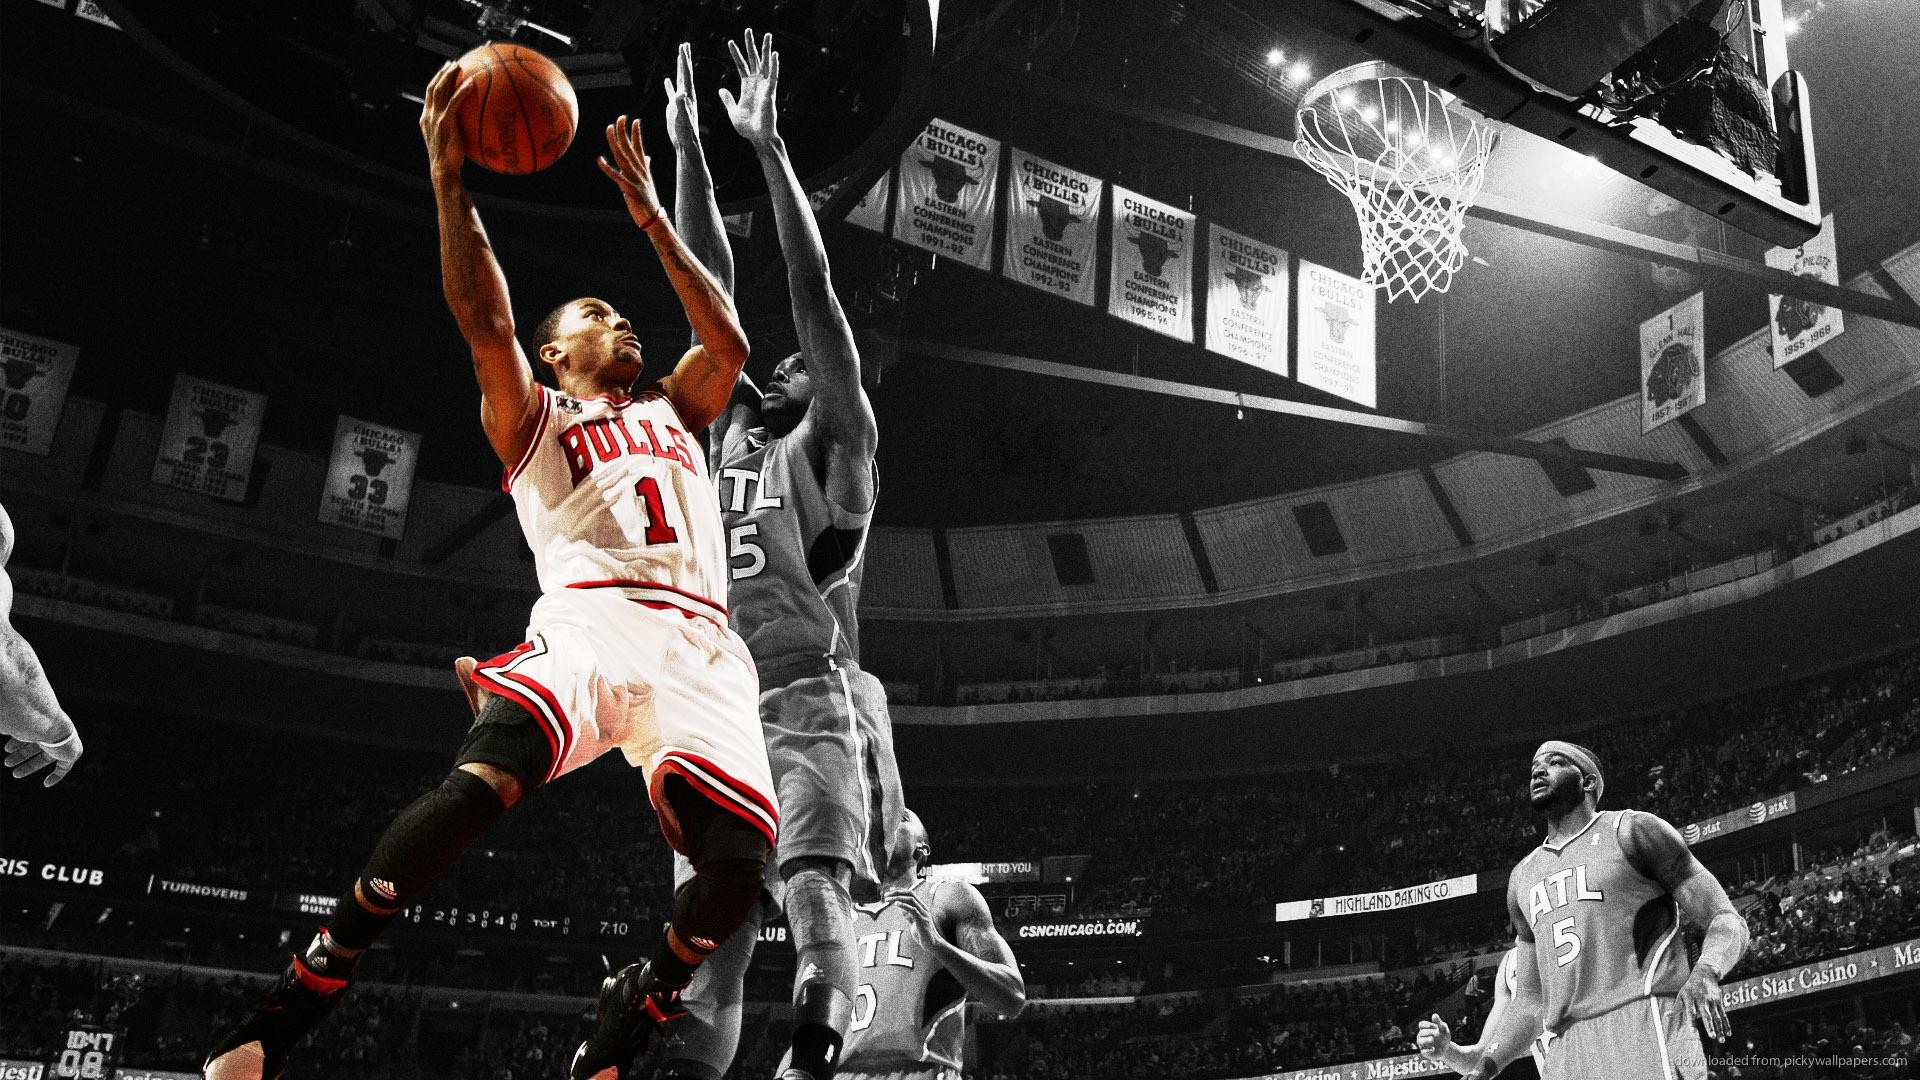 1920x1080 Derrick Rose Wallpapers High Resolution and Quality Download 1920Ã1200 Derrick  Rose Wallpaper (56